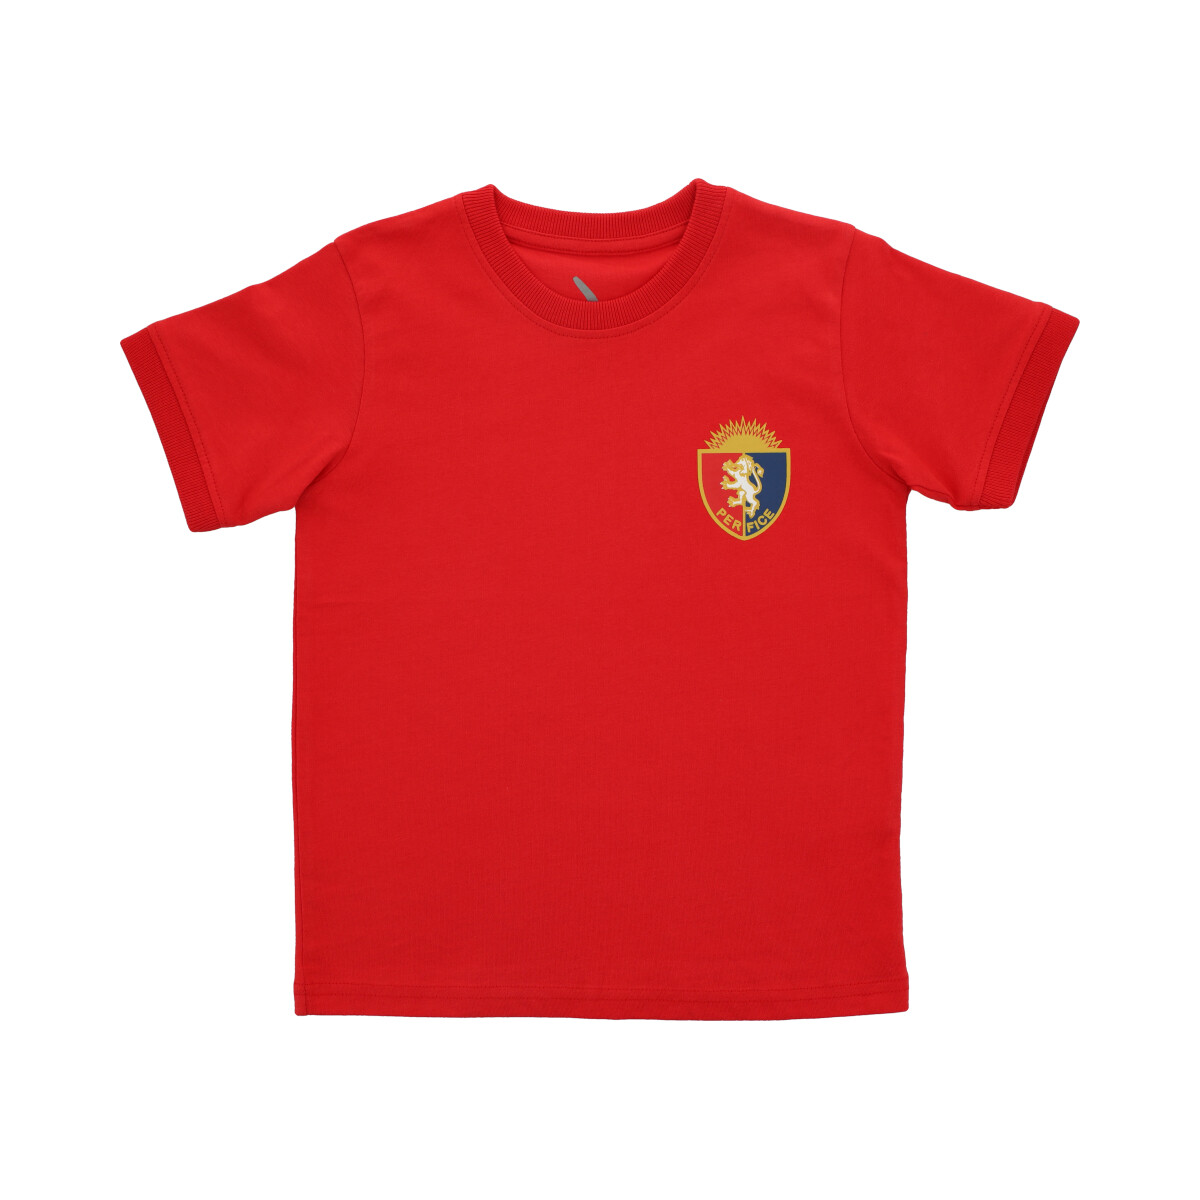 House T-shirts - Red 